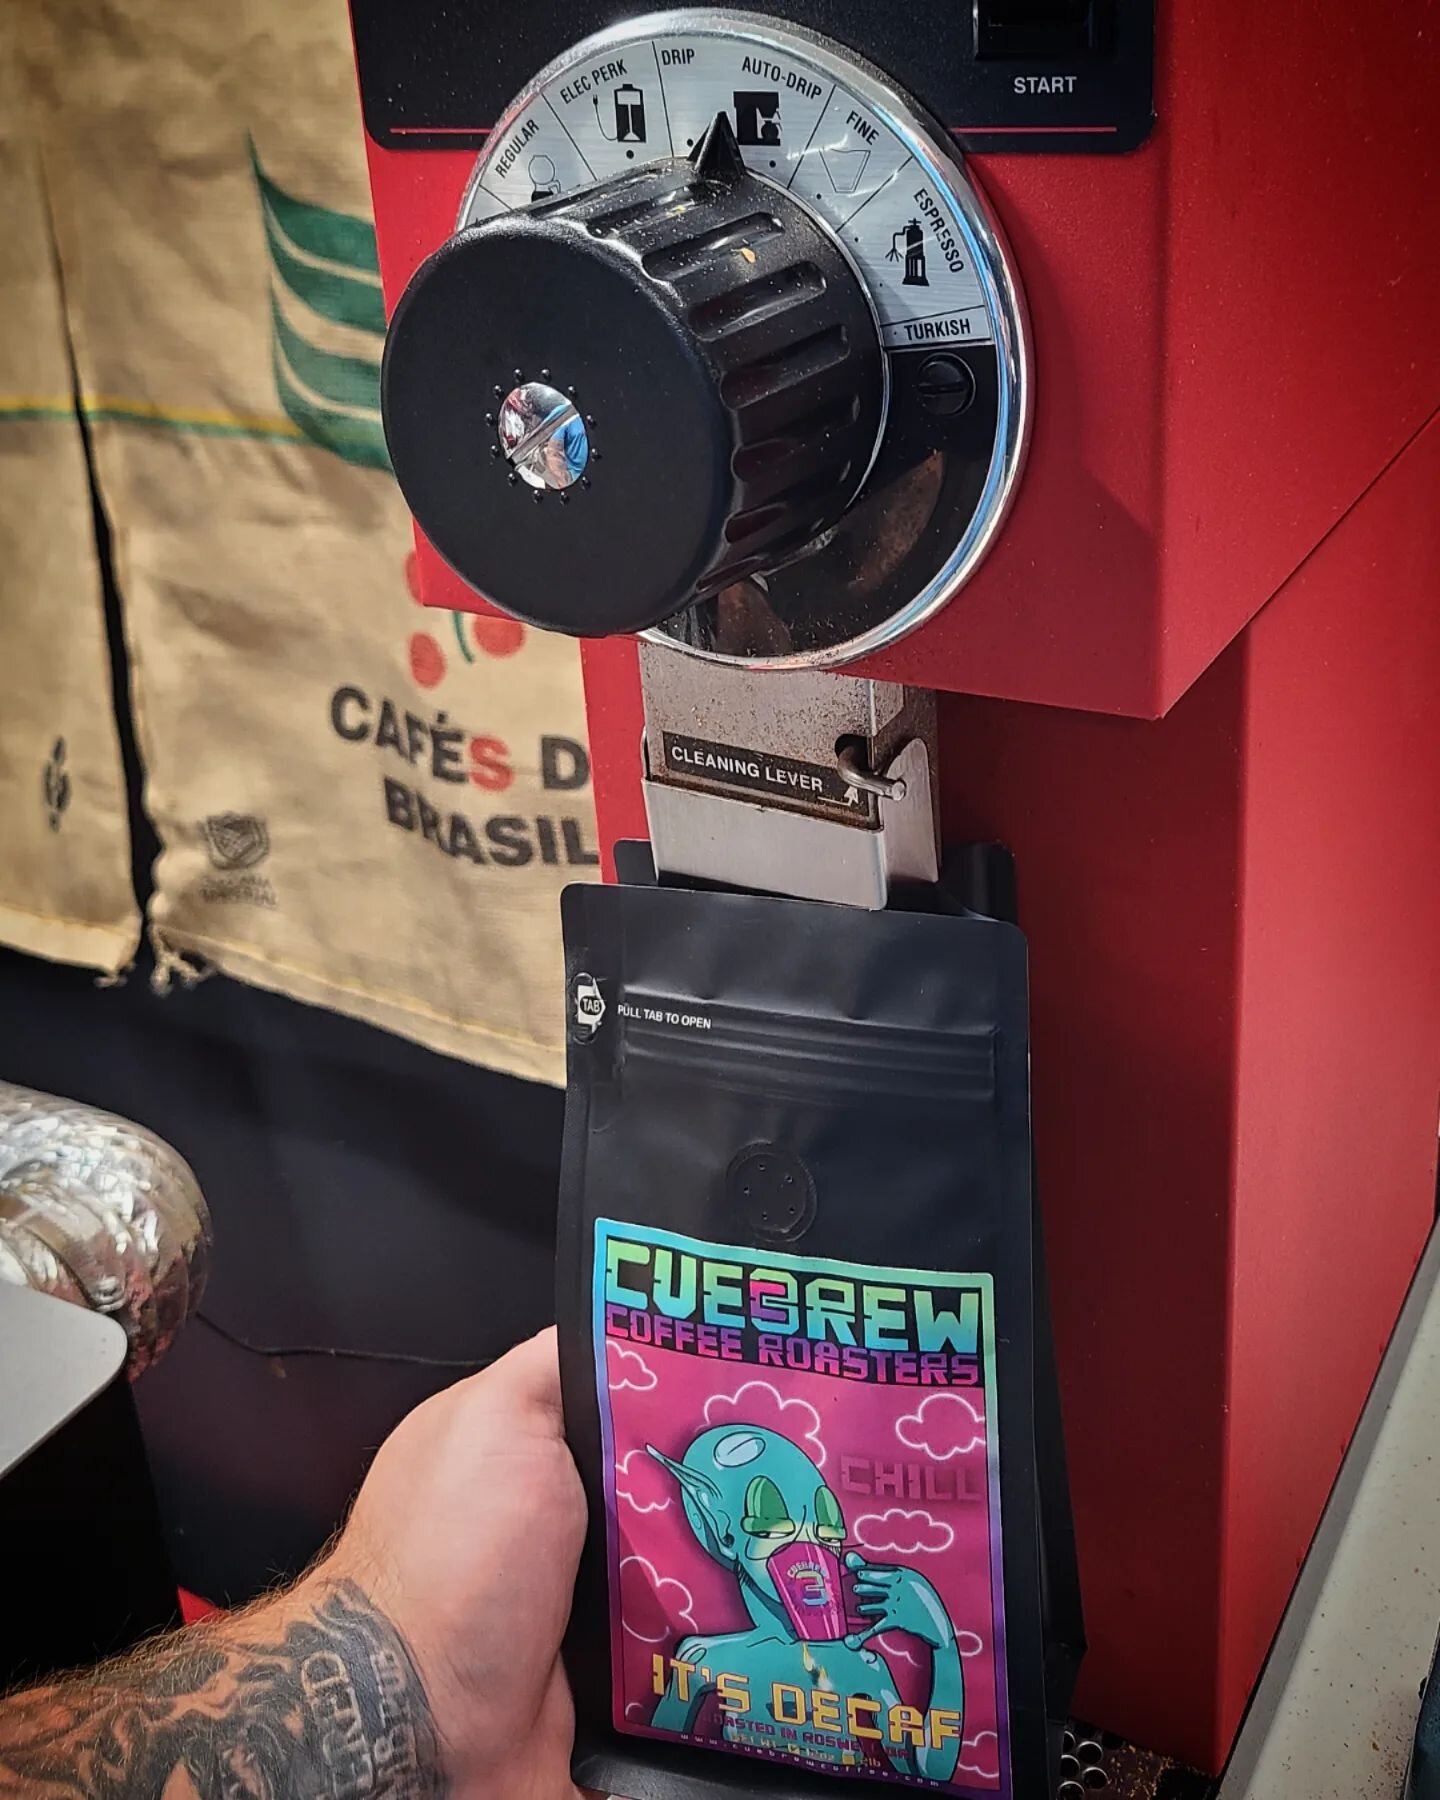 It's the weekend no need to grind away. We can do that for you! Don't need the caffeine either? Try and Chill It's Decaf! 

#coffee #cuebrew #coffeeroaster #coffeetime #smallbatchcoffee #shopsmall #smallbusiness #roswellga #summercoffee #icedcoffee #